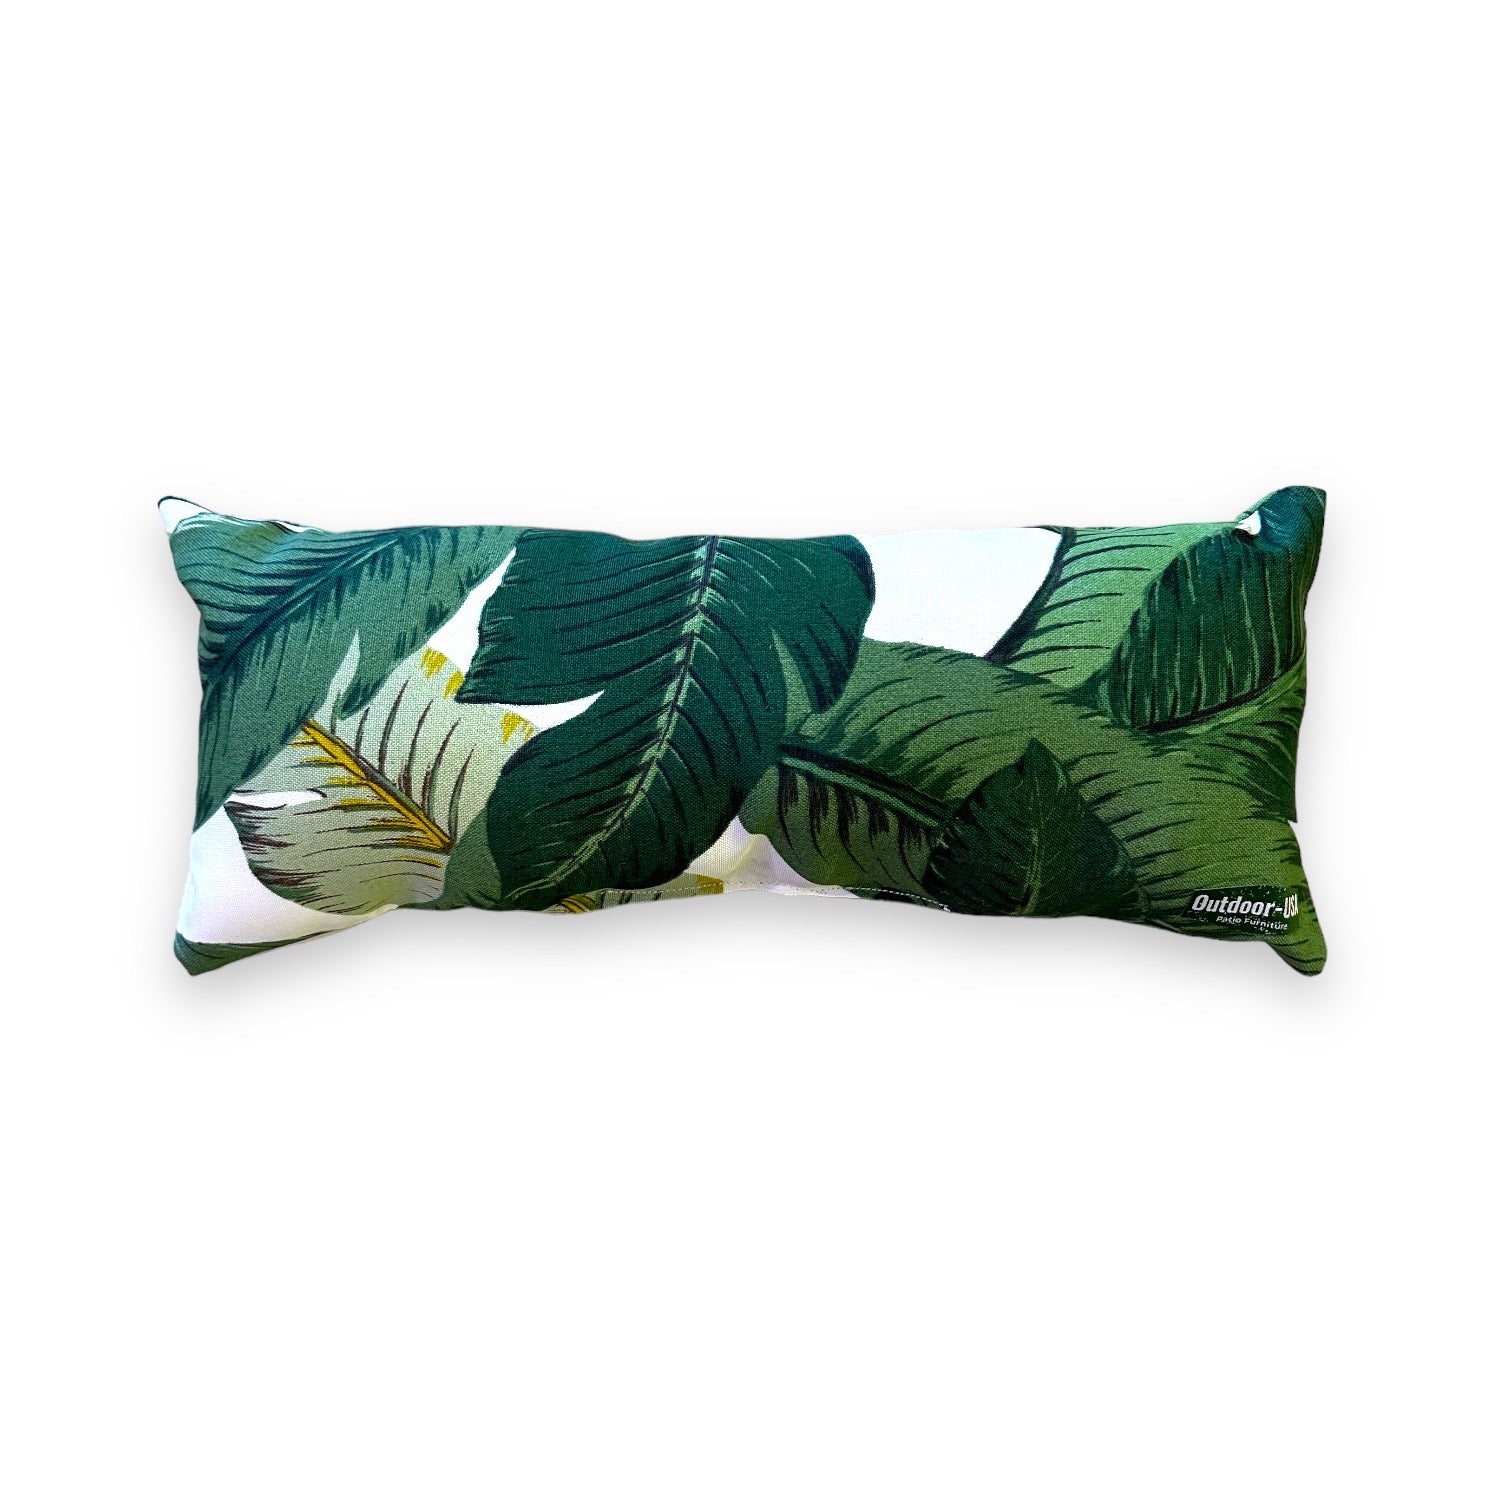 Tommy Bahama Outdoor 17-in x 7-in Mini Lumbar Throw Pillow with Sunbrella Fabric - Mellow Monkey